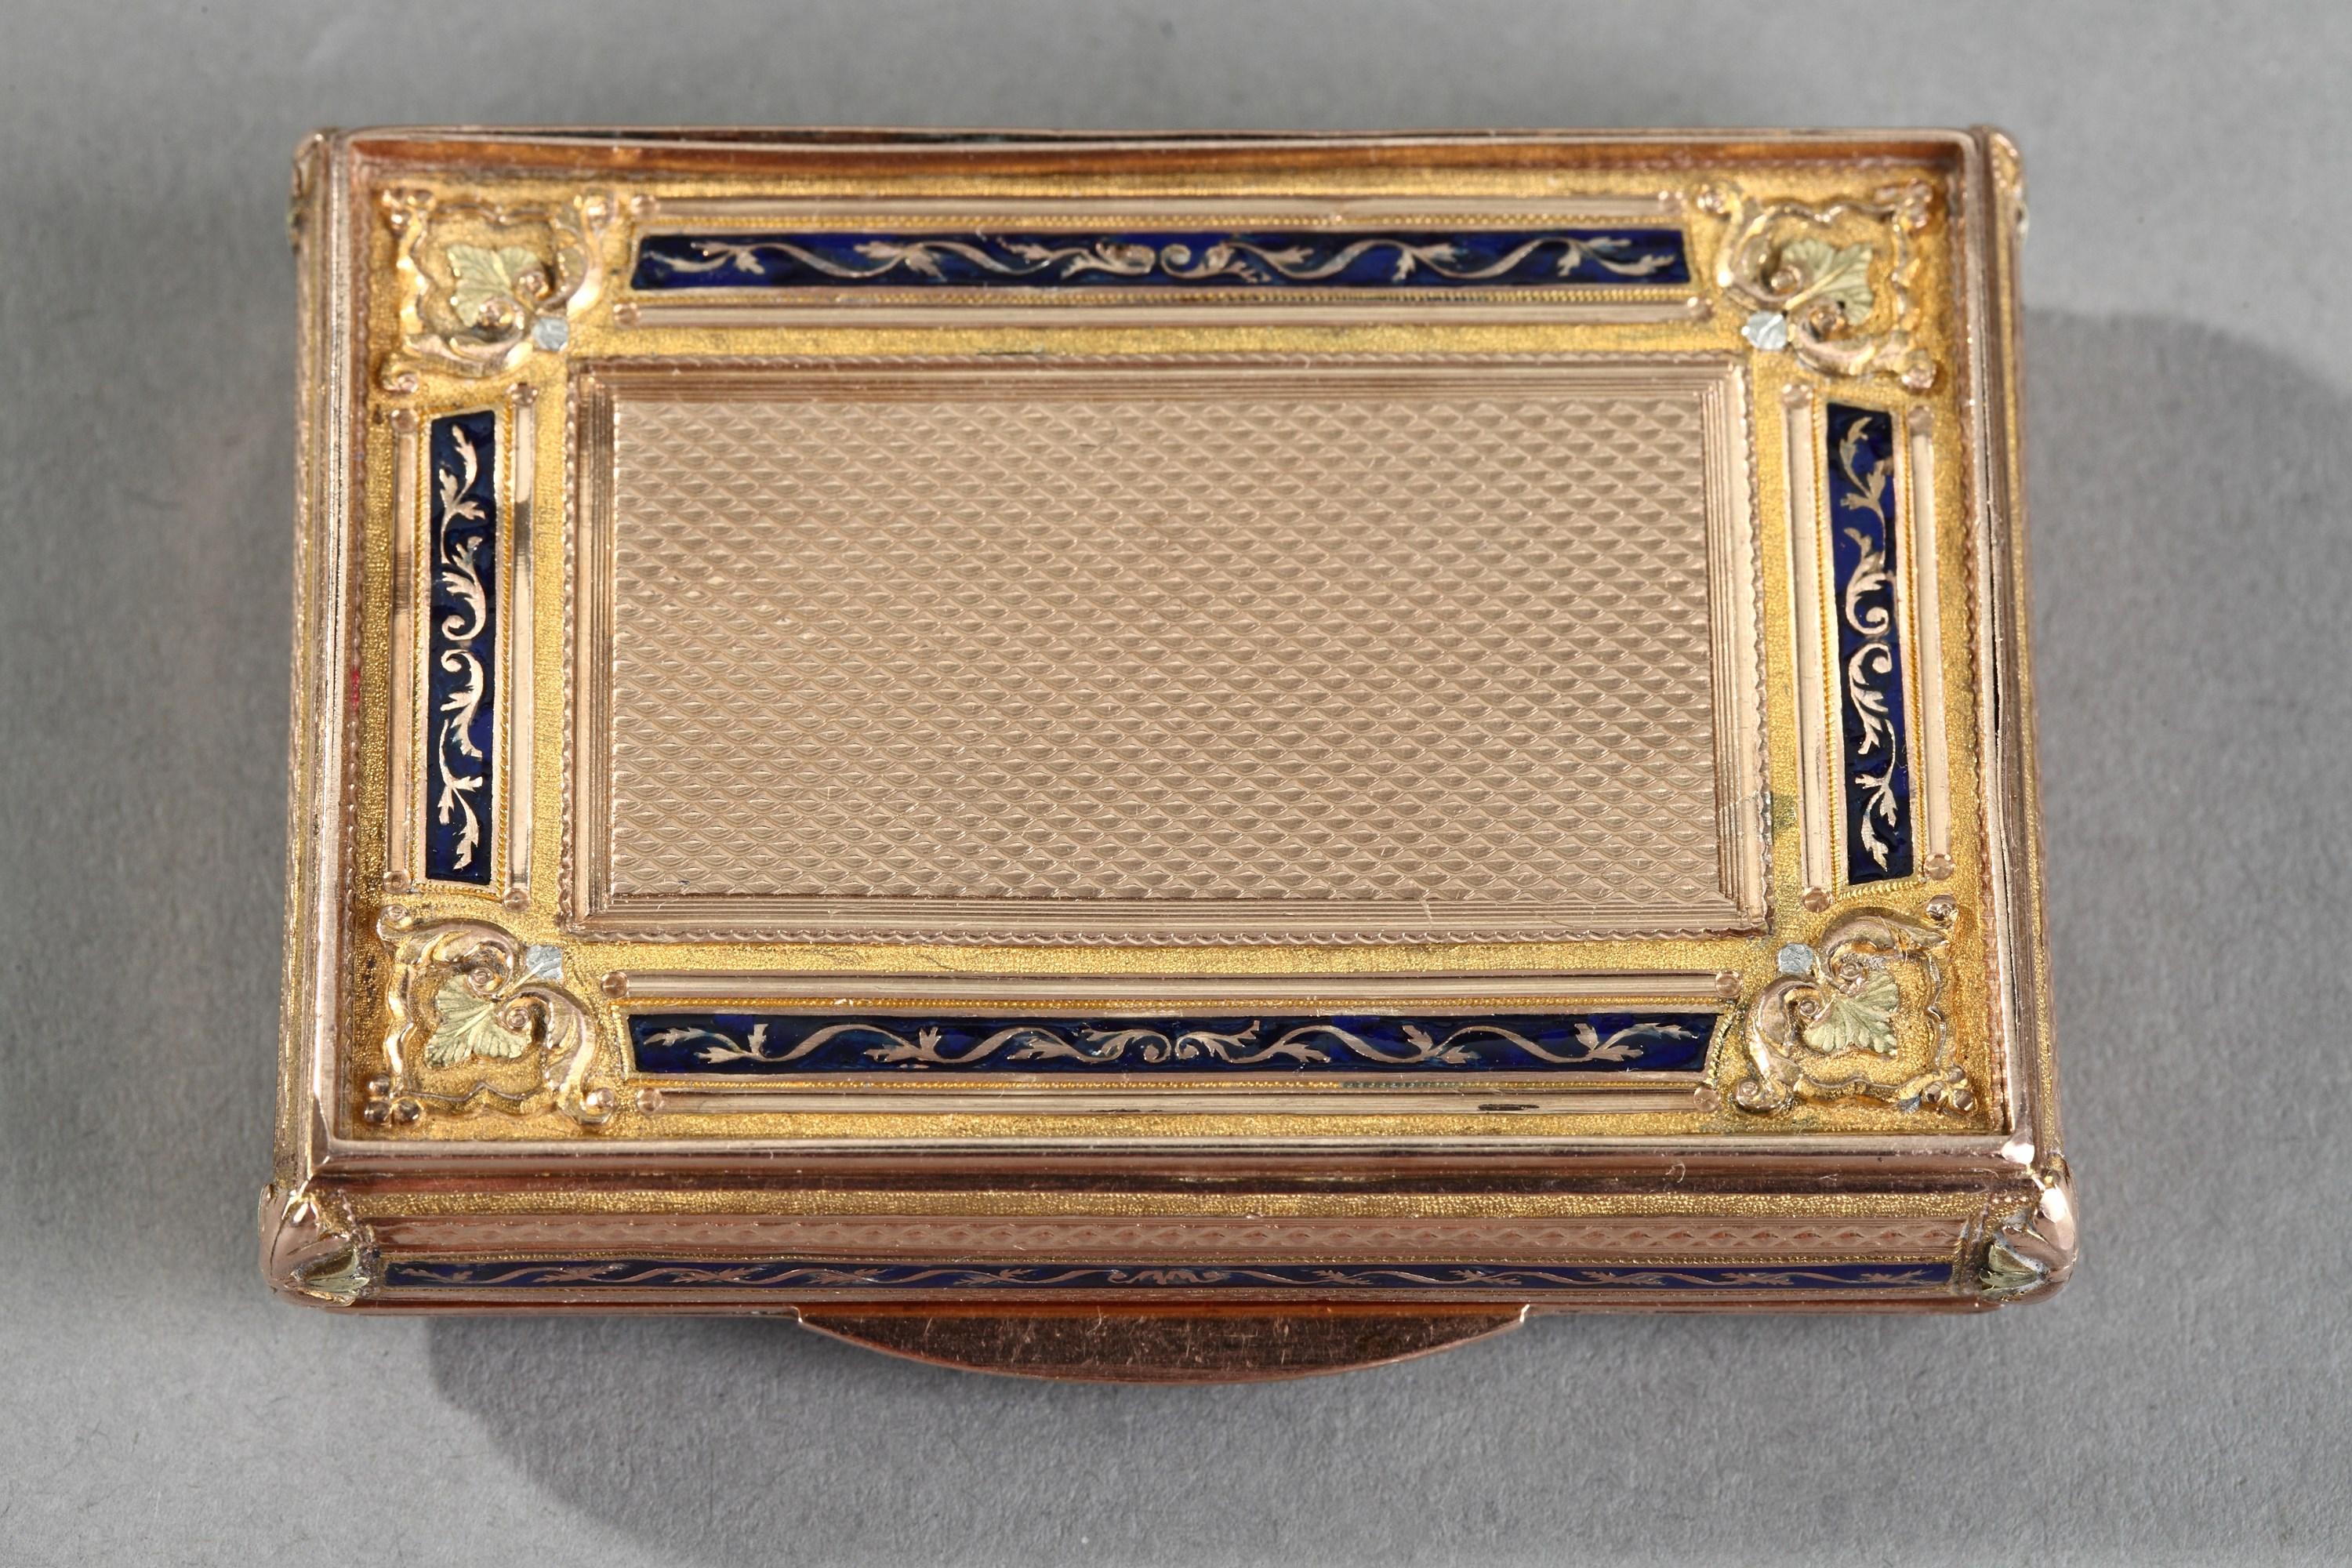 Early 19th Century Gold and Enamel Box, Swiss Work For Sale 2